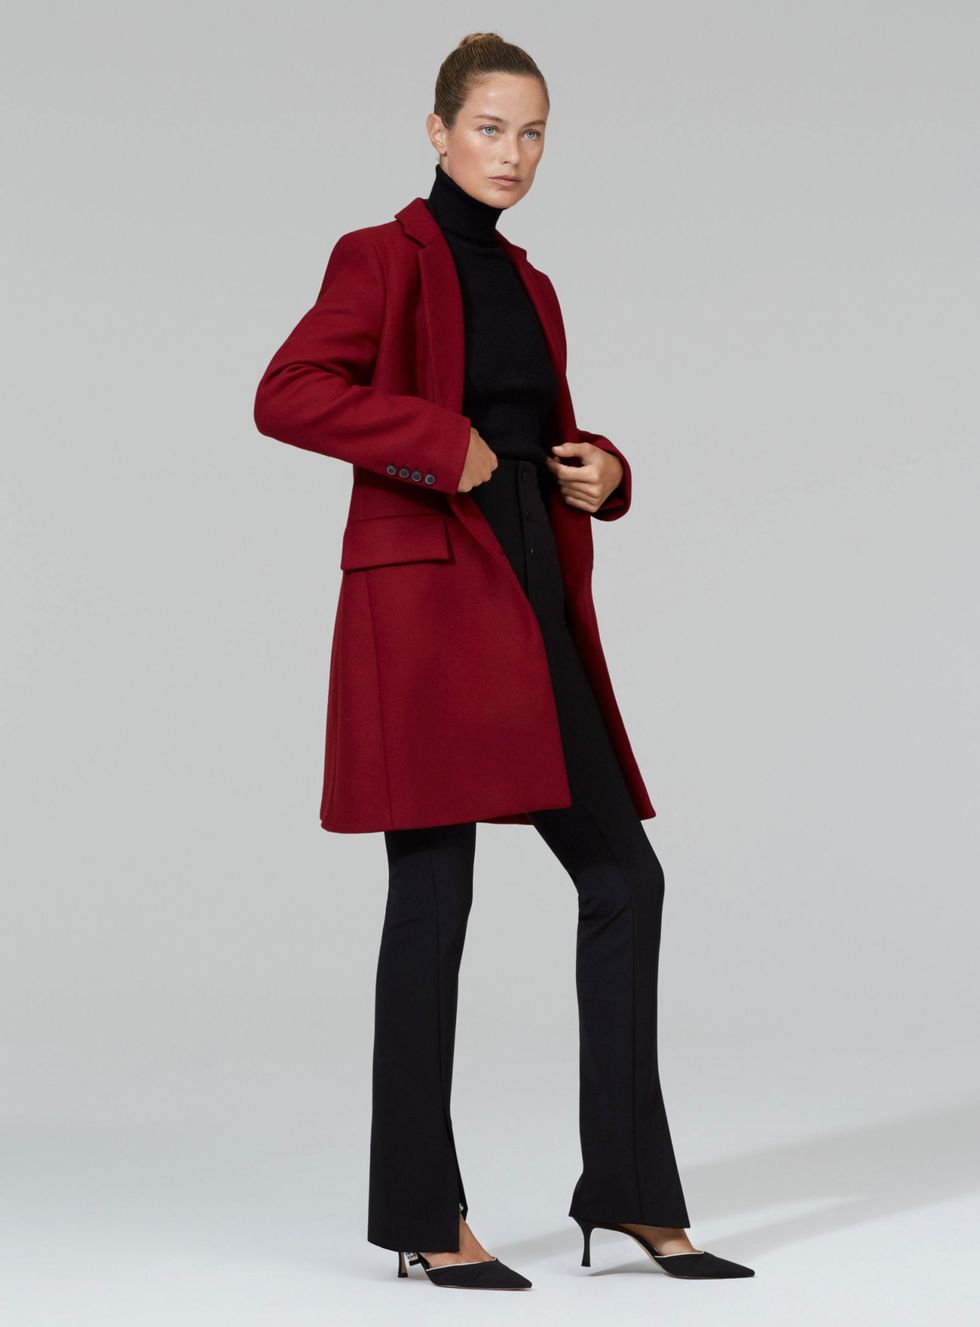 Clothing, Overcoat, Coat, Outerwear, Standing, Fashion, Fashion model, Maroon, Shoulder, Duster, 